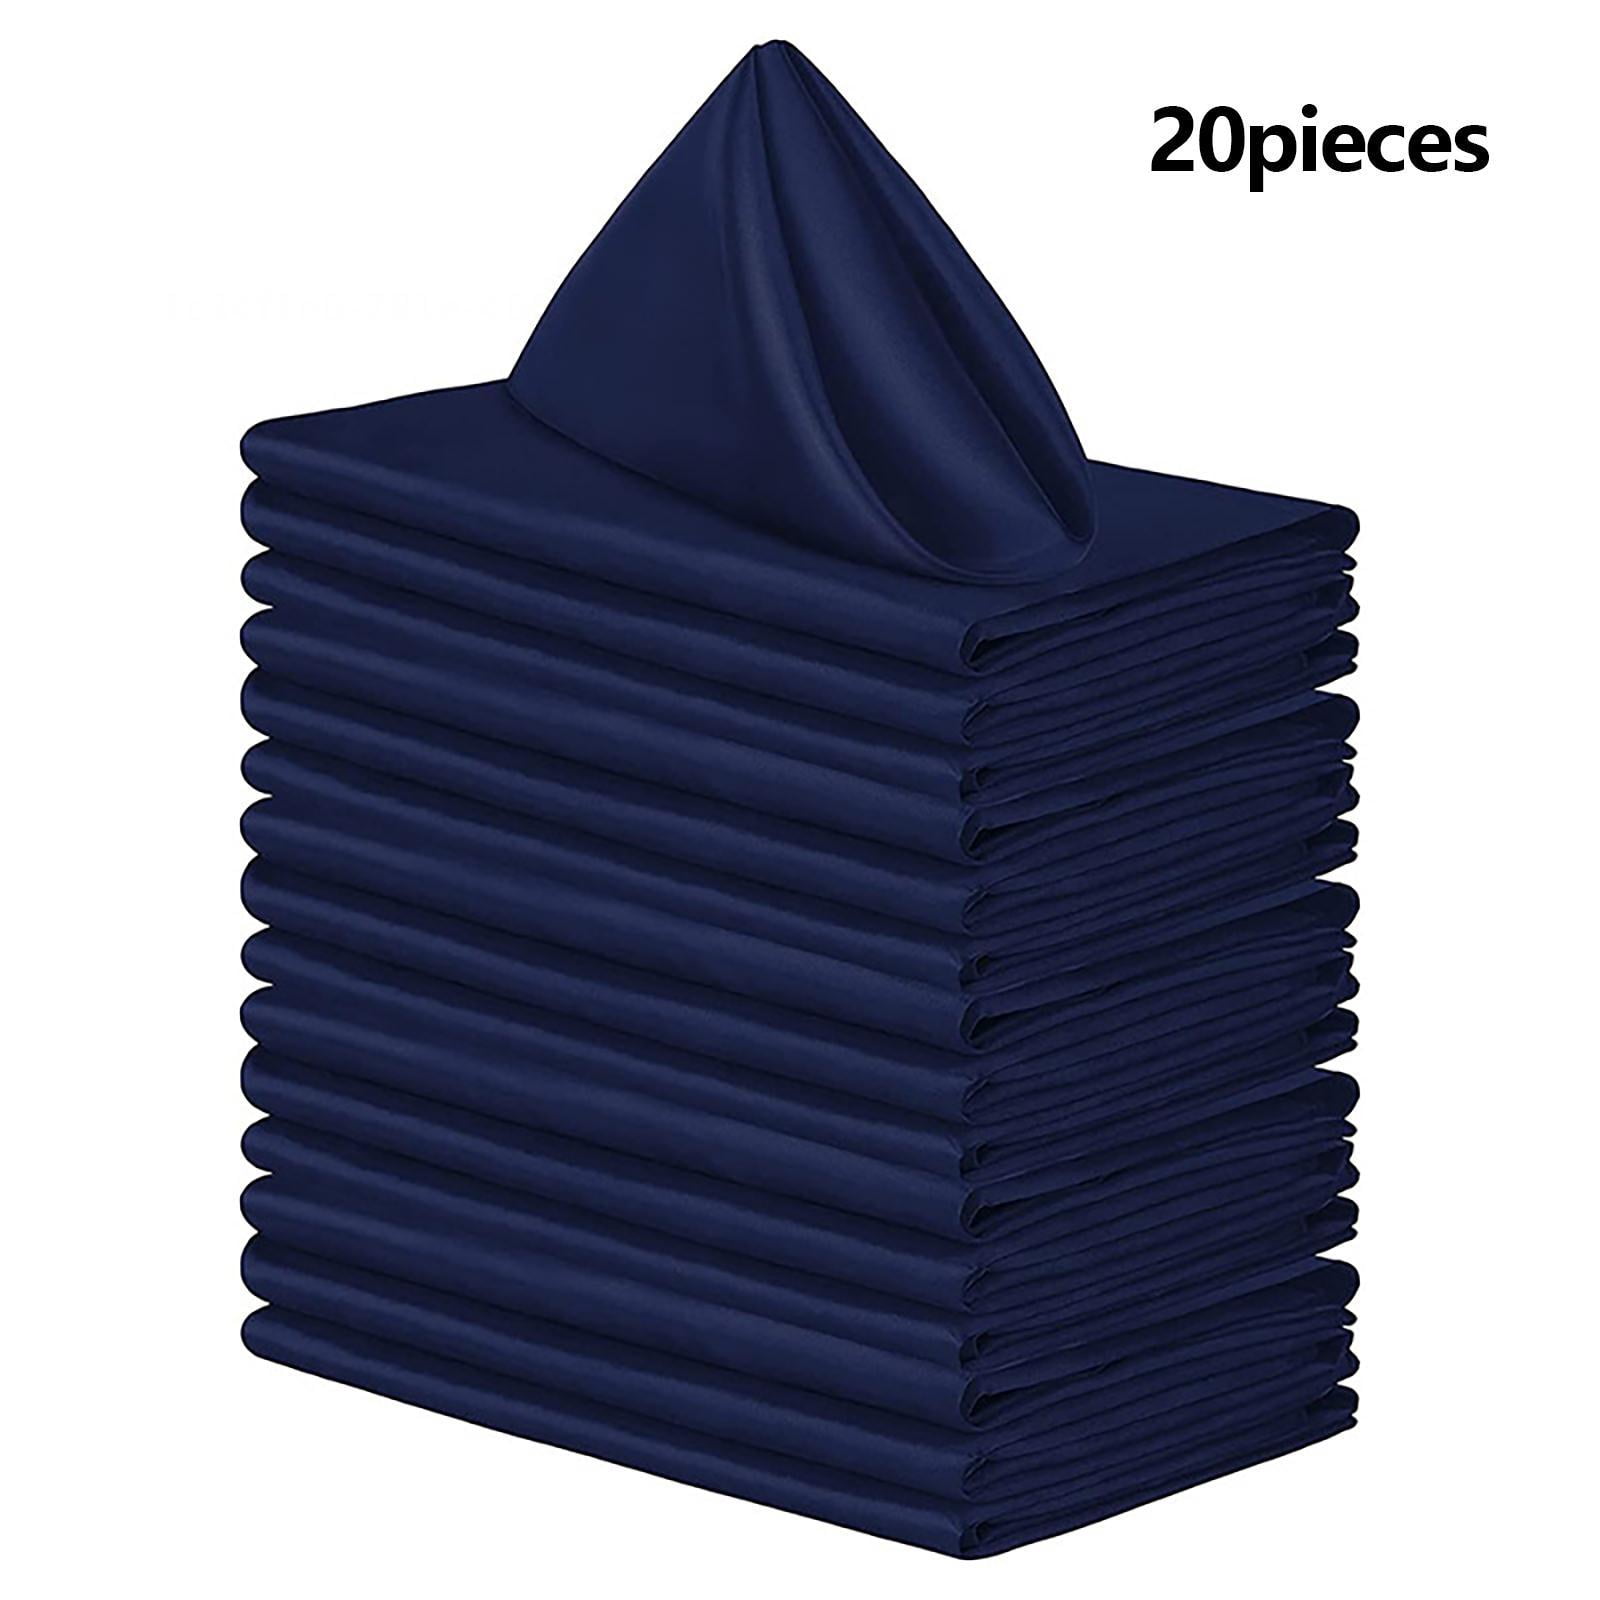 Arkwright 25 Pack of Cloth Dinner Napkins - Navy Blue - Restaurant Quality - 20 inch x 20 inch, Size: 20 x 20